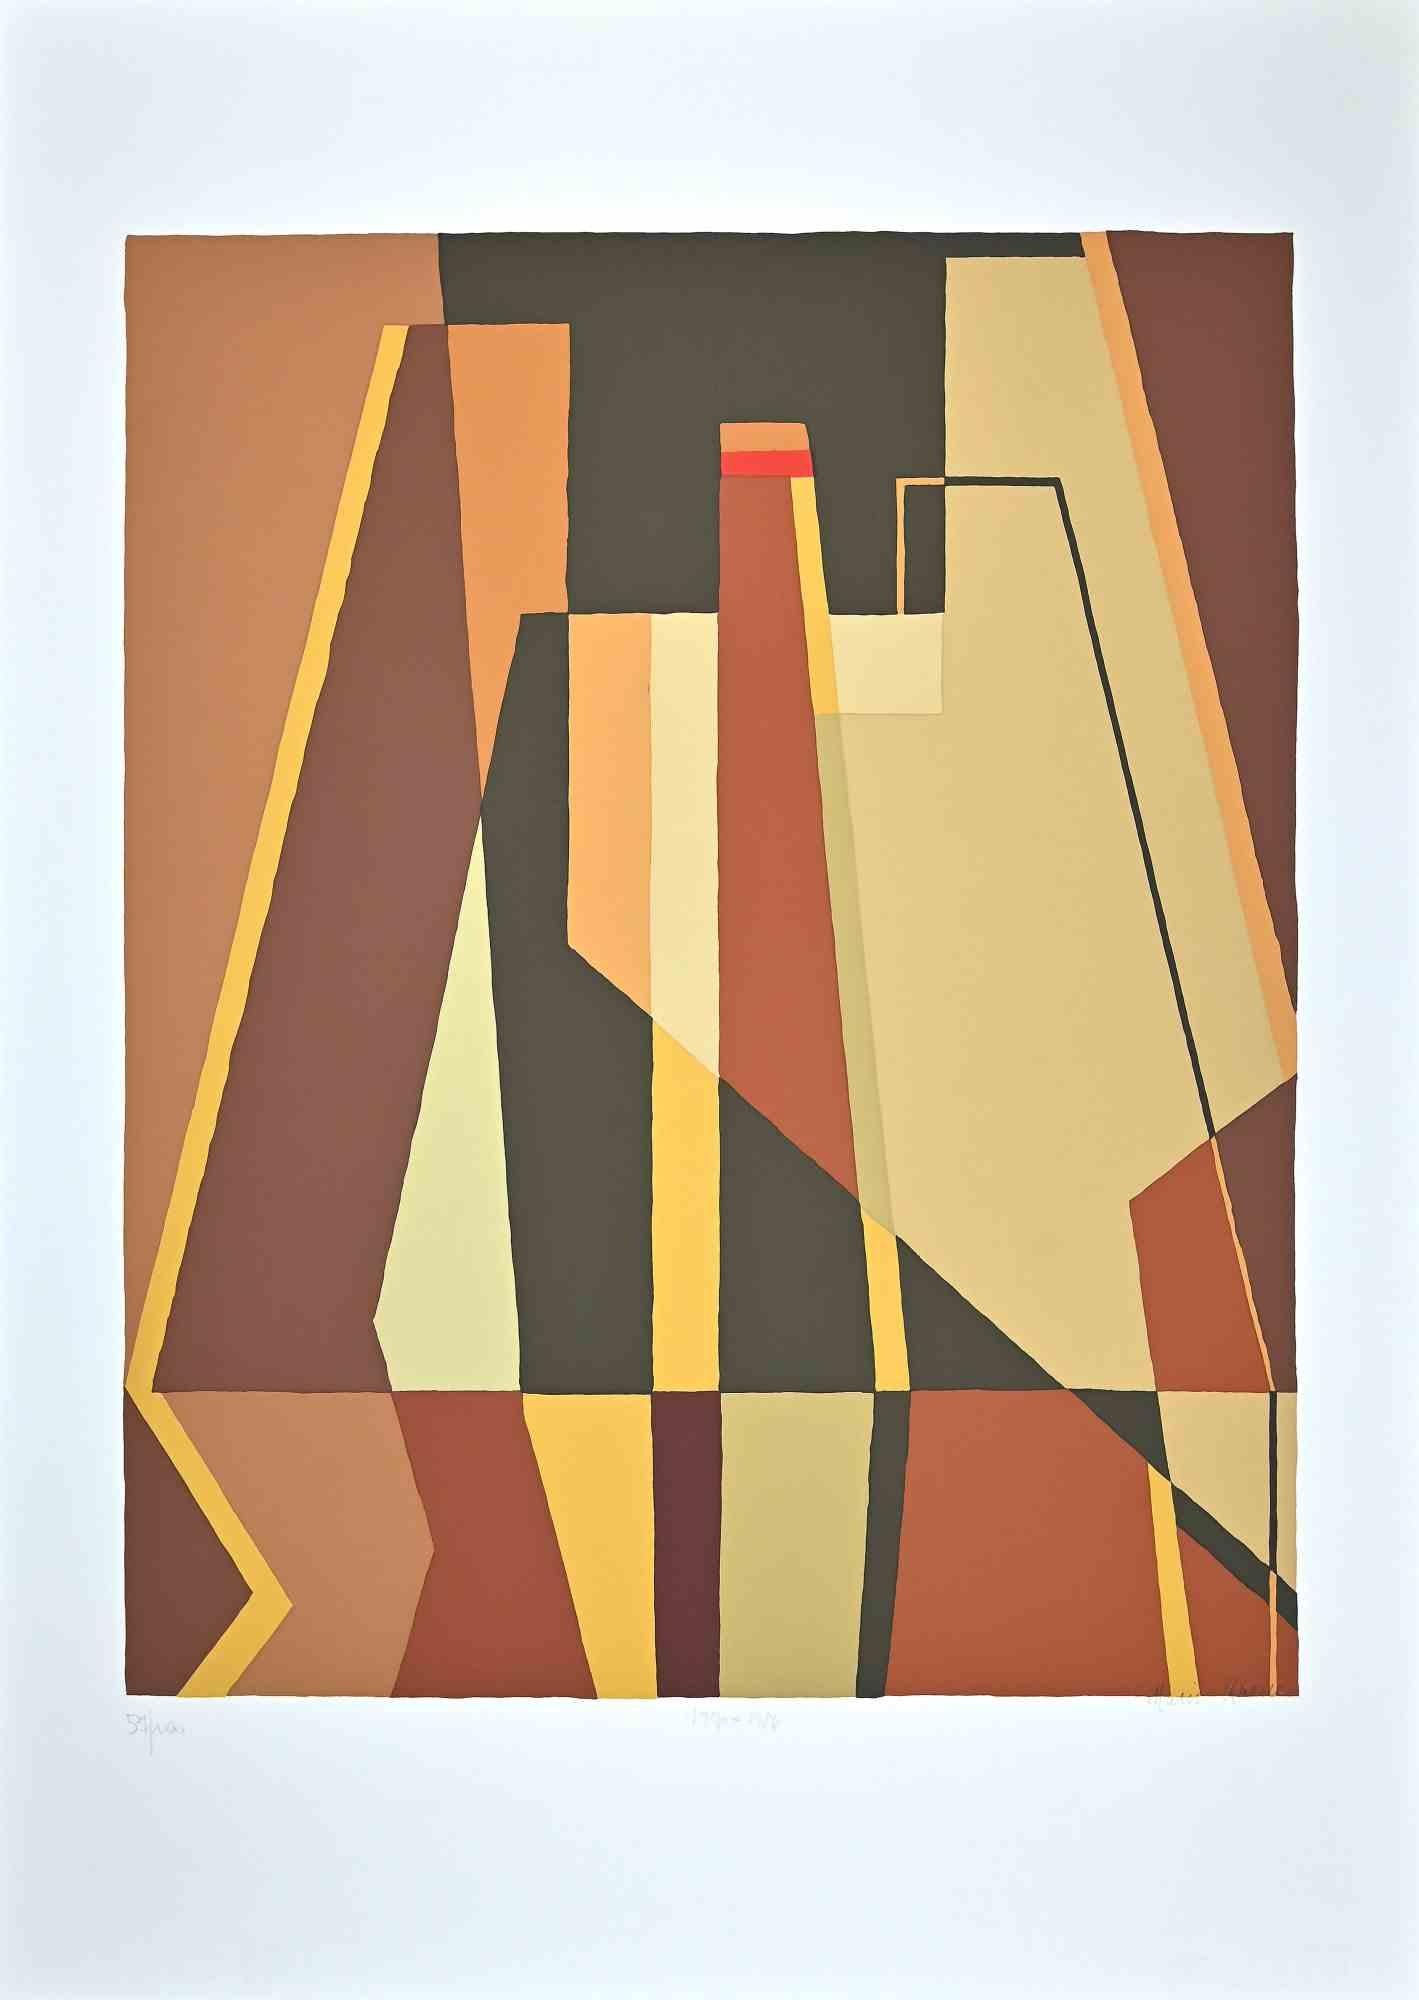  Abstract composition is a beautiful original colored screen print on paper, realized by the Italian artist and pioneer of Abstract Art Mario Radice  (1898-1987), in 1988

Hand-signed and numbered in pencil on the lower margin.

Edition of